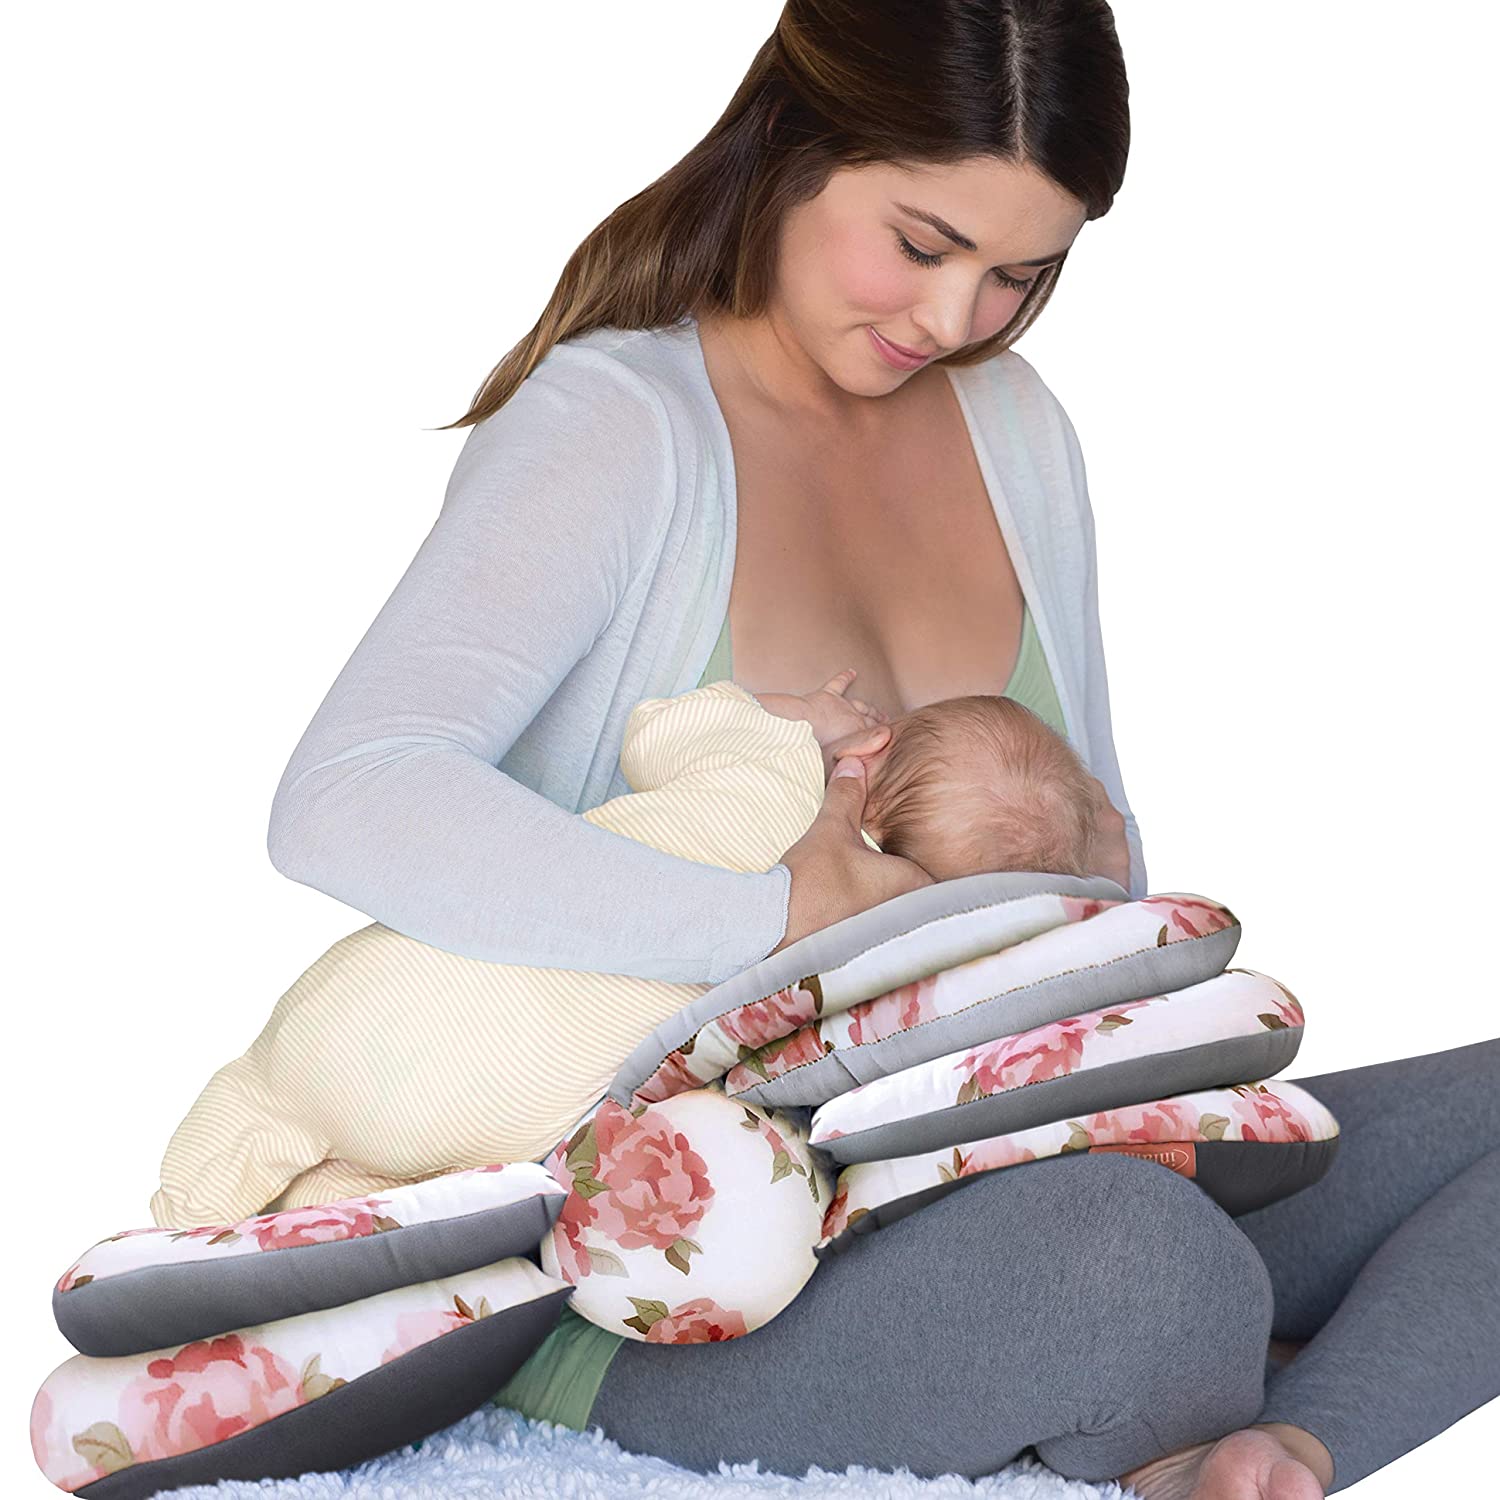 Sanxian Adjustable Breast Feeding Pillow Best for Mothers While Breast Feeding and Baby Sitting Soft and Safety Nursing Posture Pillow 